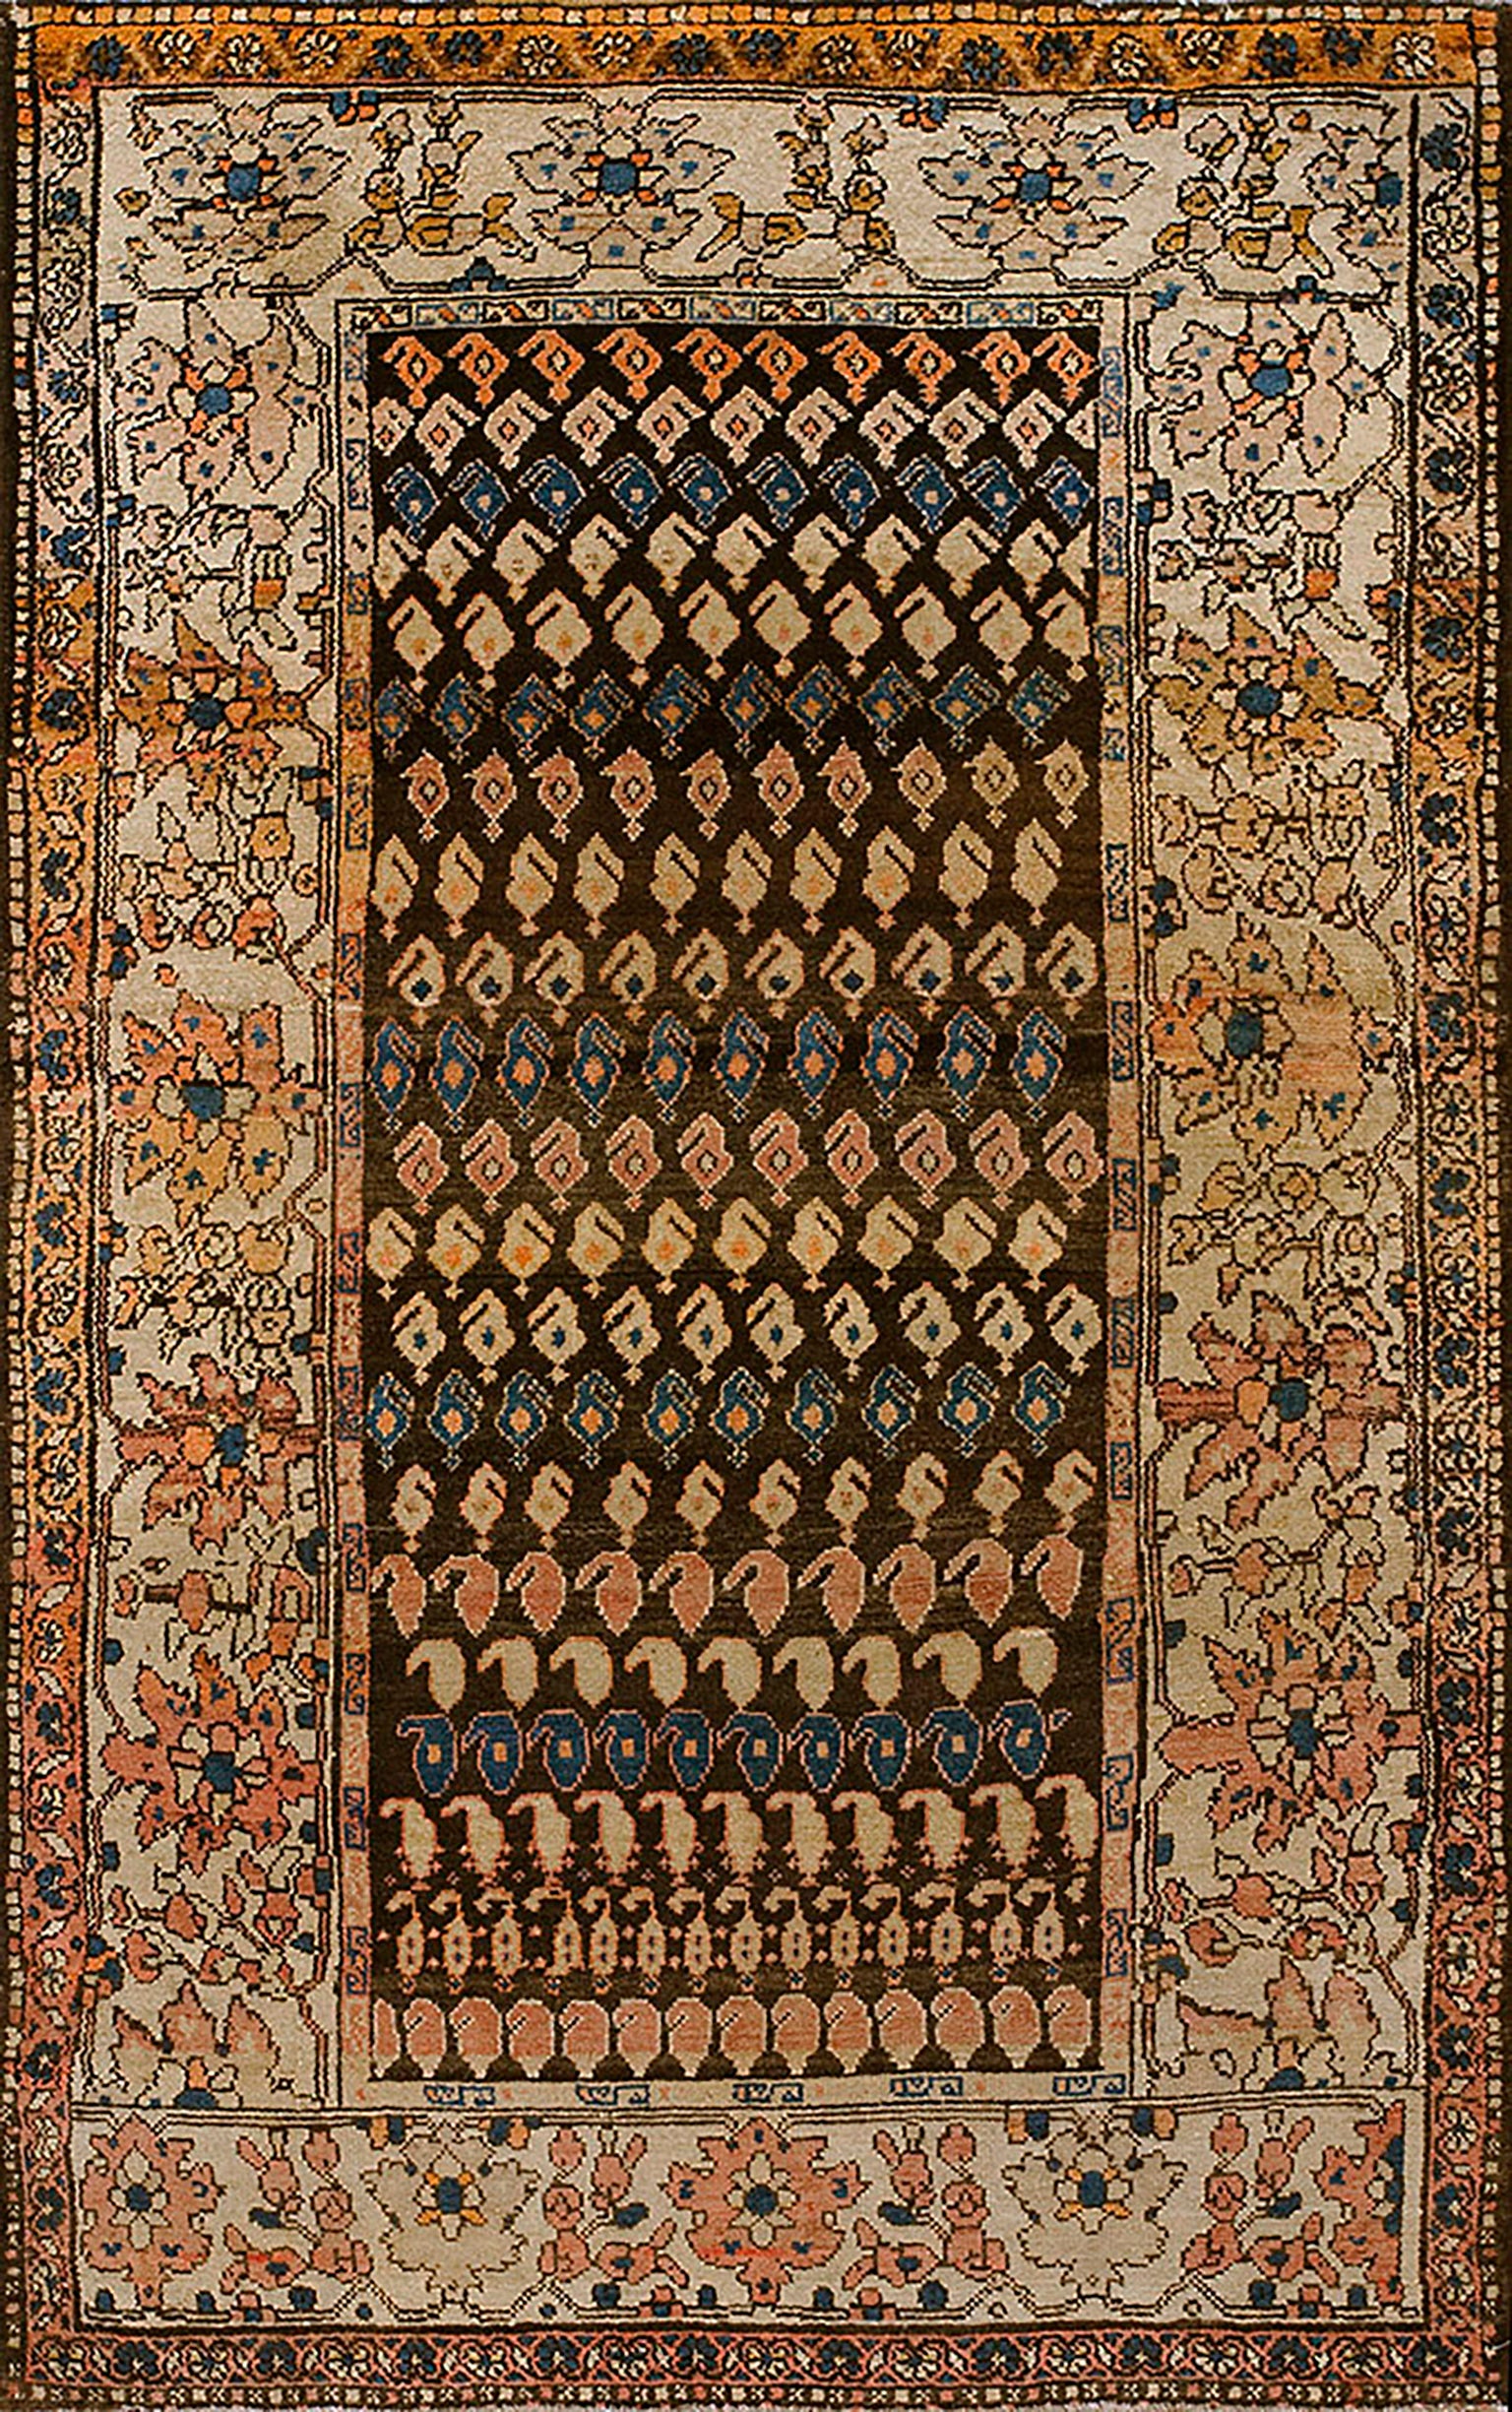 Early 20th Century Persian Malayer Paisley Carpet ( 4' x 6'5" - 122 x 196 ) For Sale